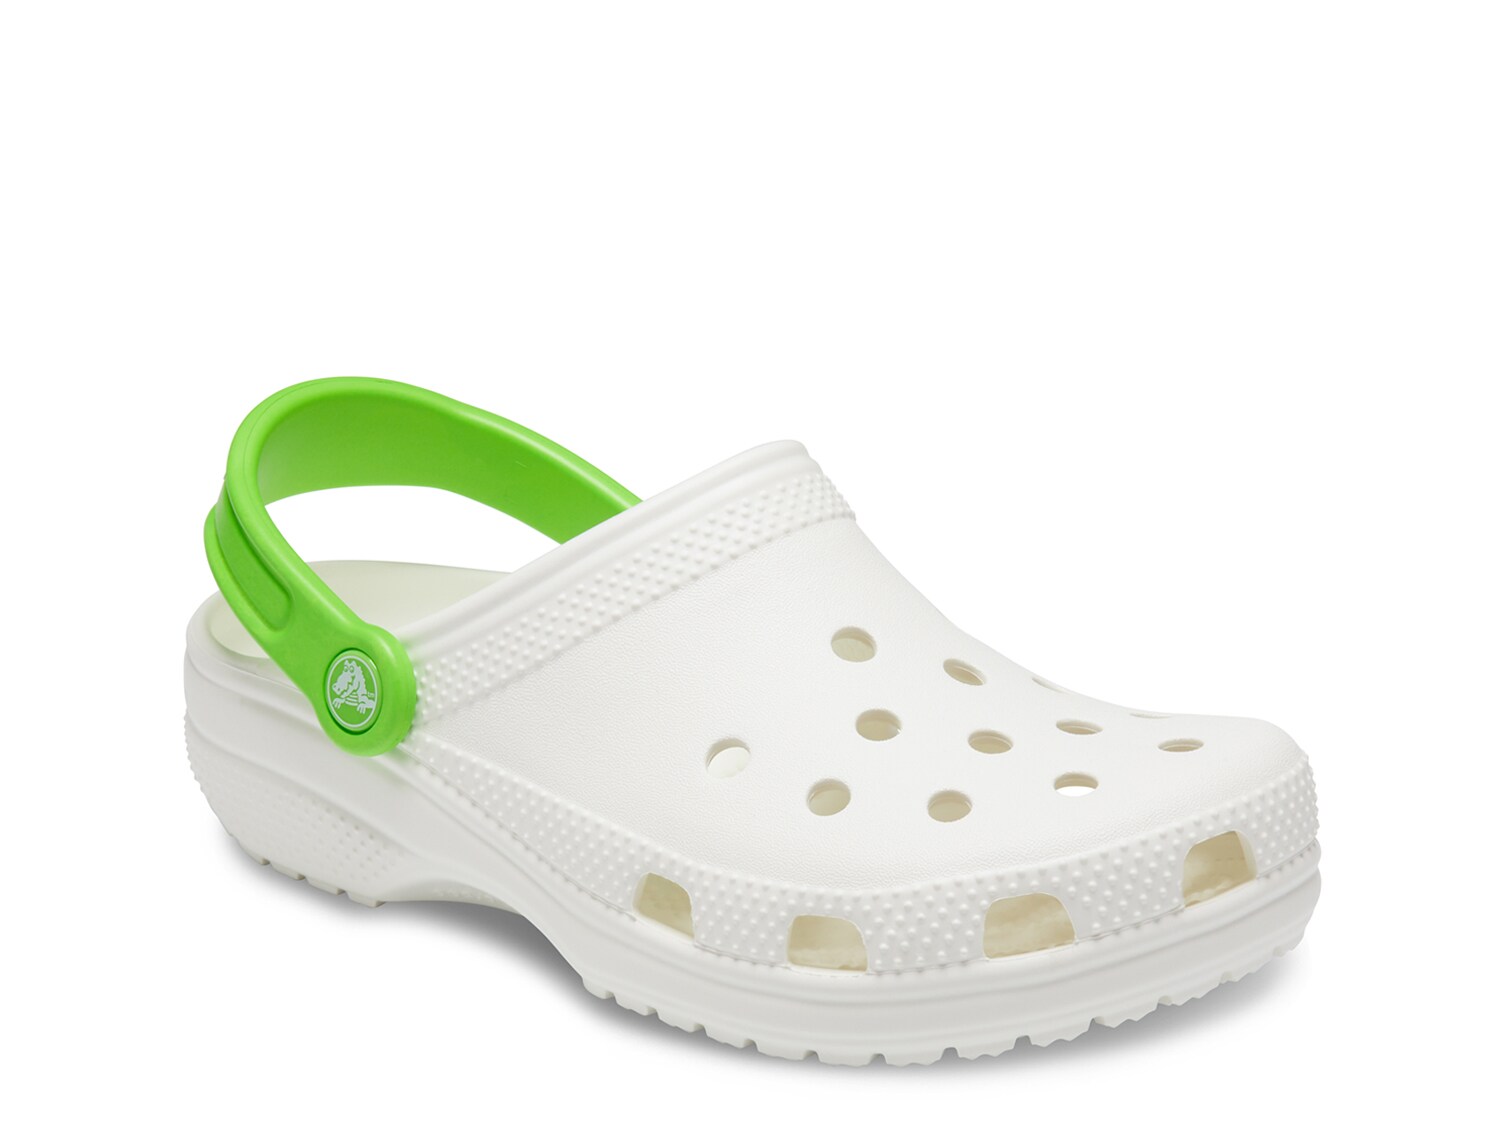 crocs with different colored straps